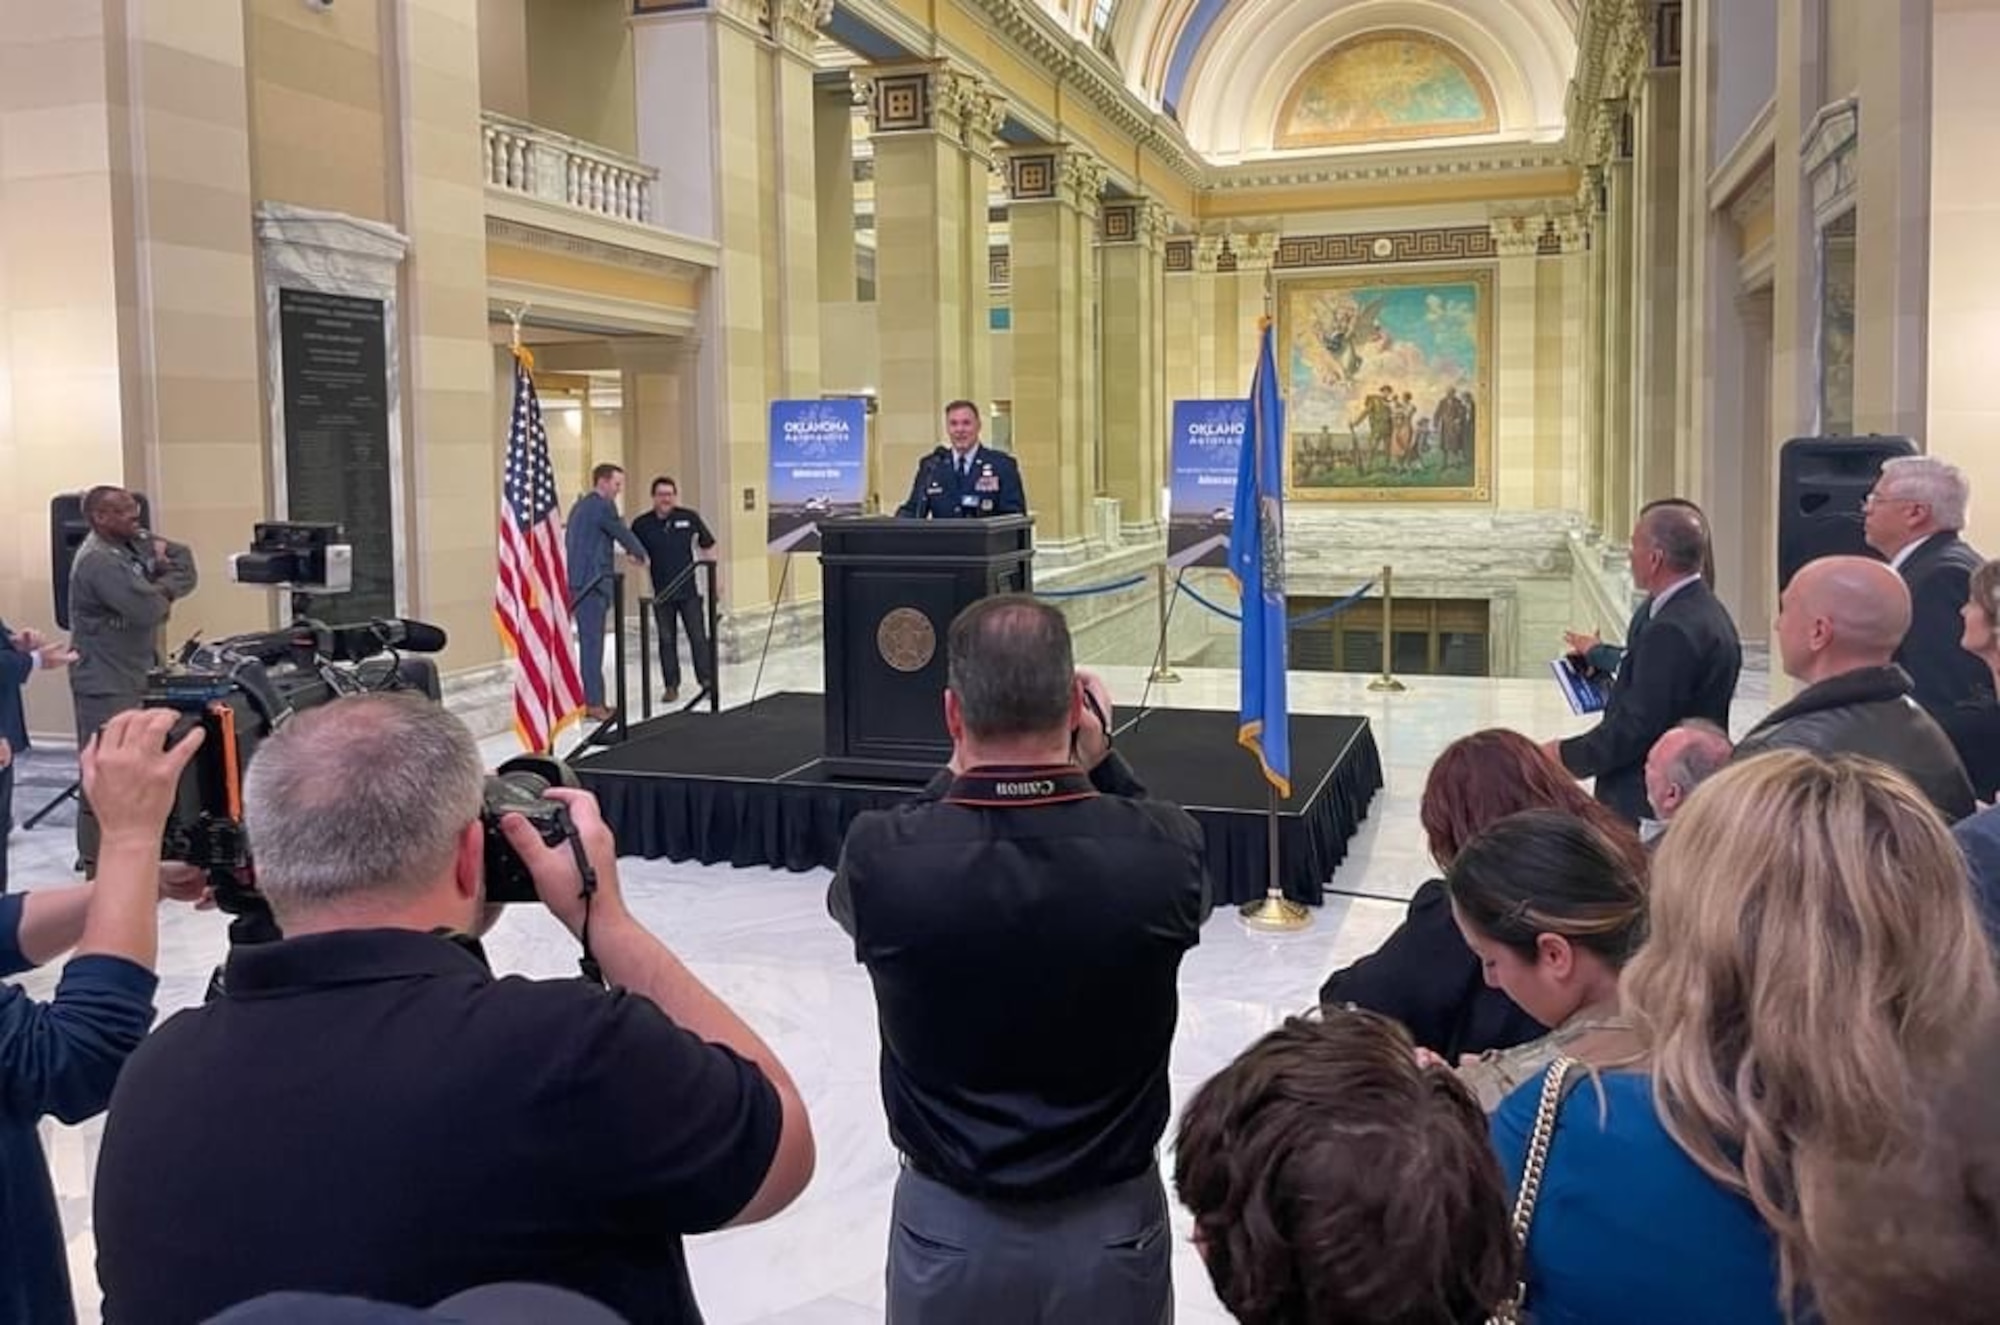 72nd Air Base Wing Commander, Col. G. Hall Sebren, Jr., took the opportunity to address a packed house on the fourth floor of the Oklahoma State Capitol March 30 for AERO Oklahoma Day.